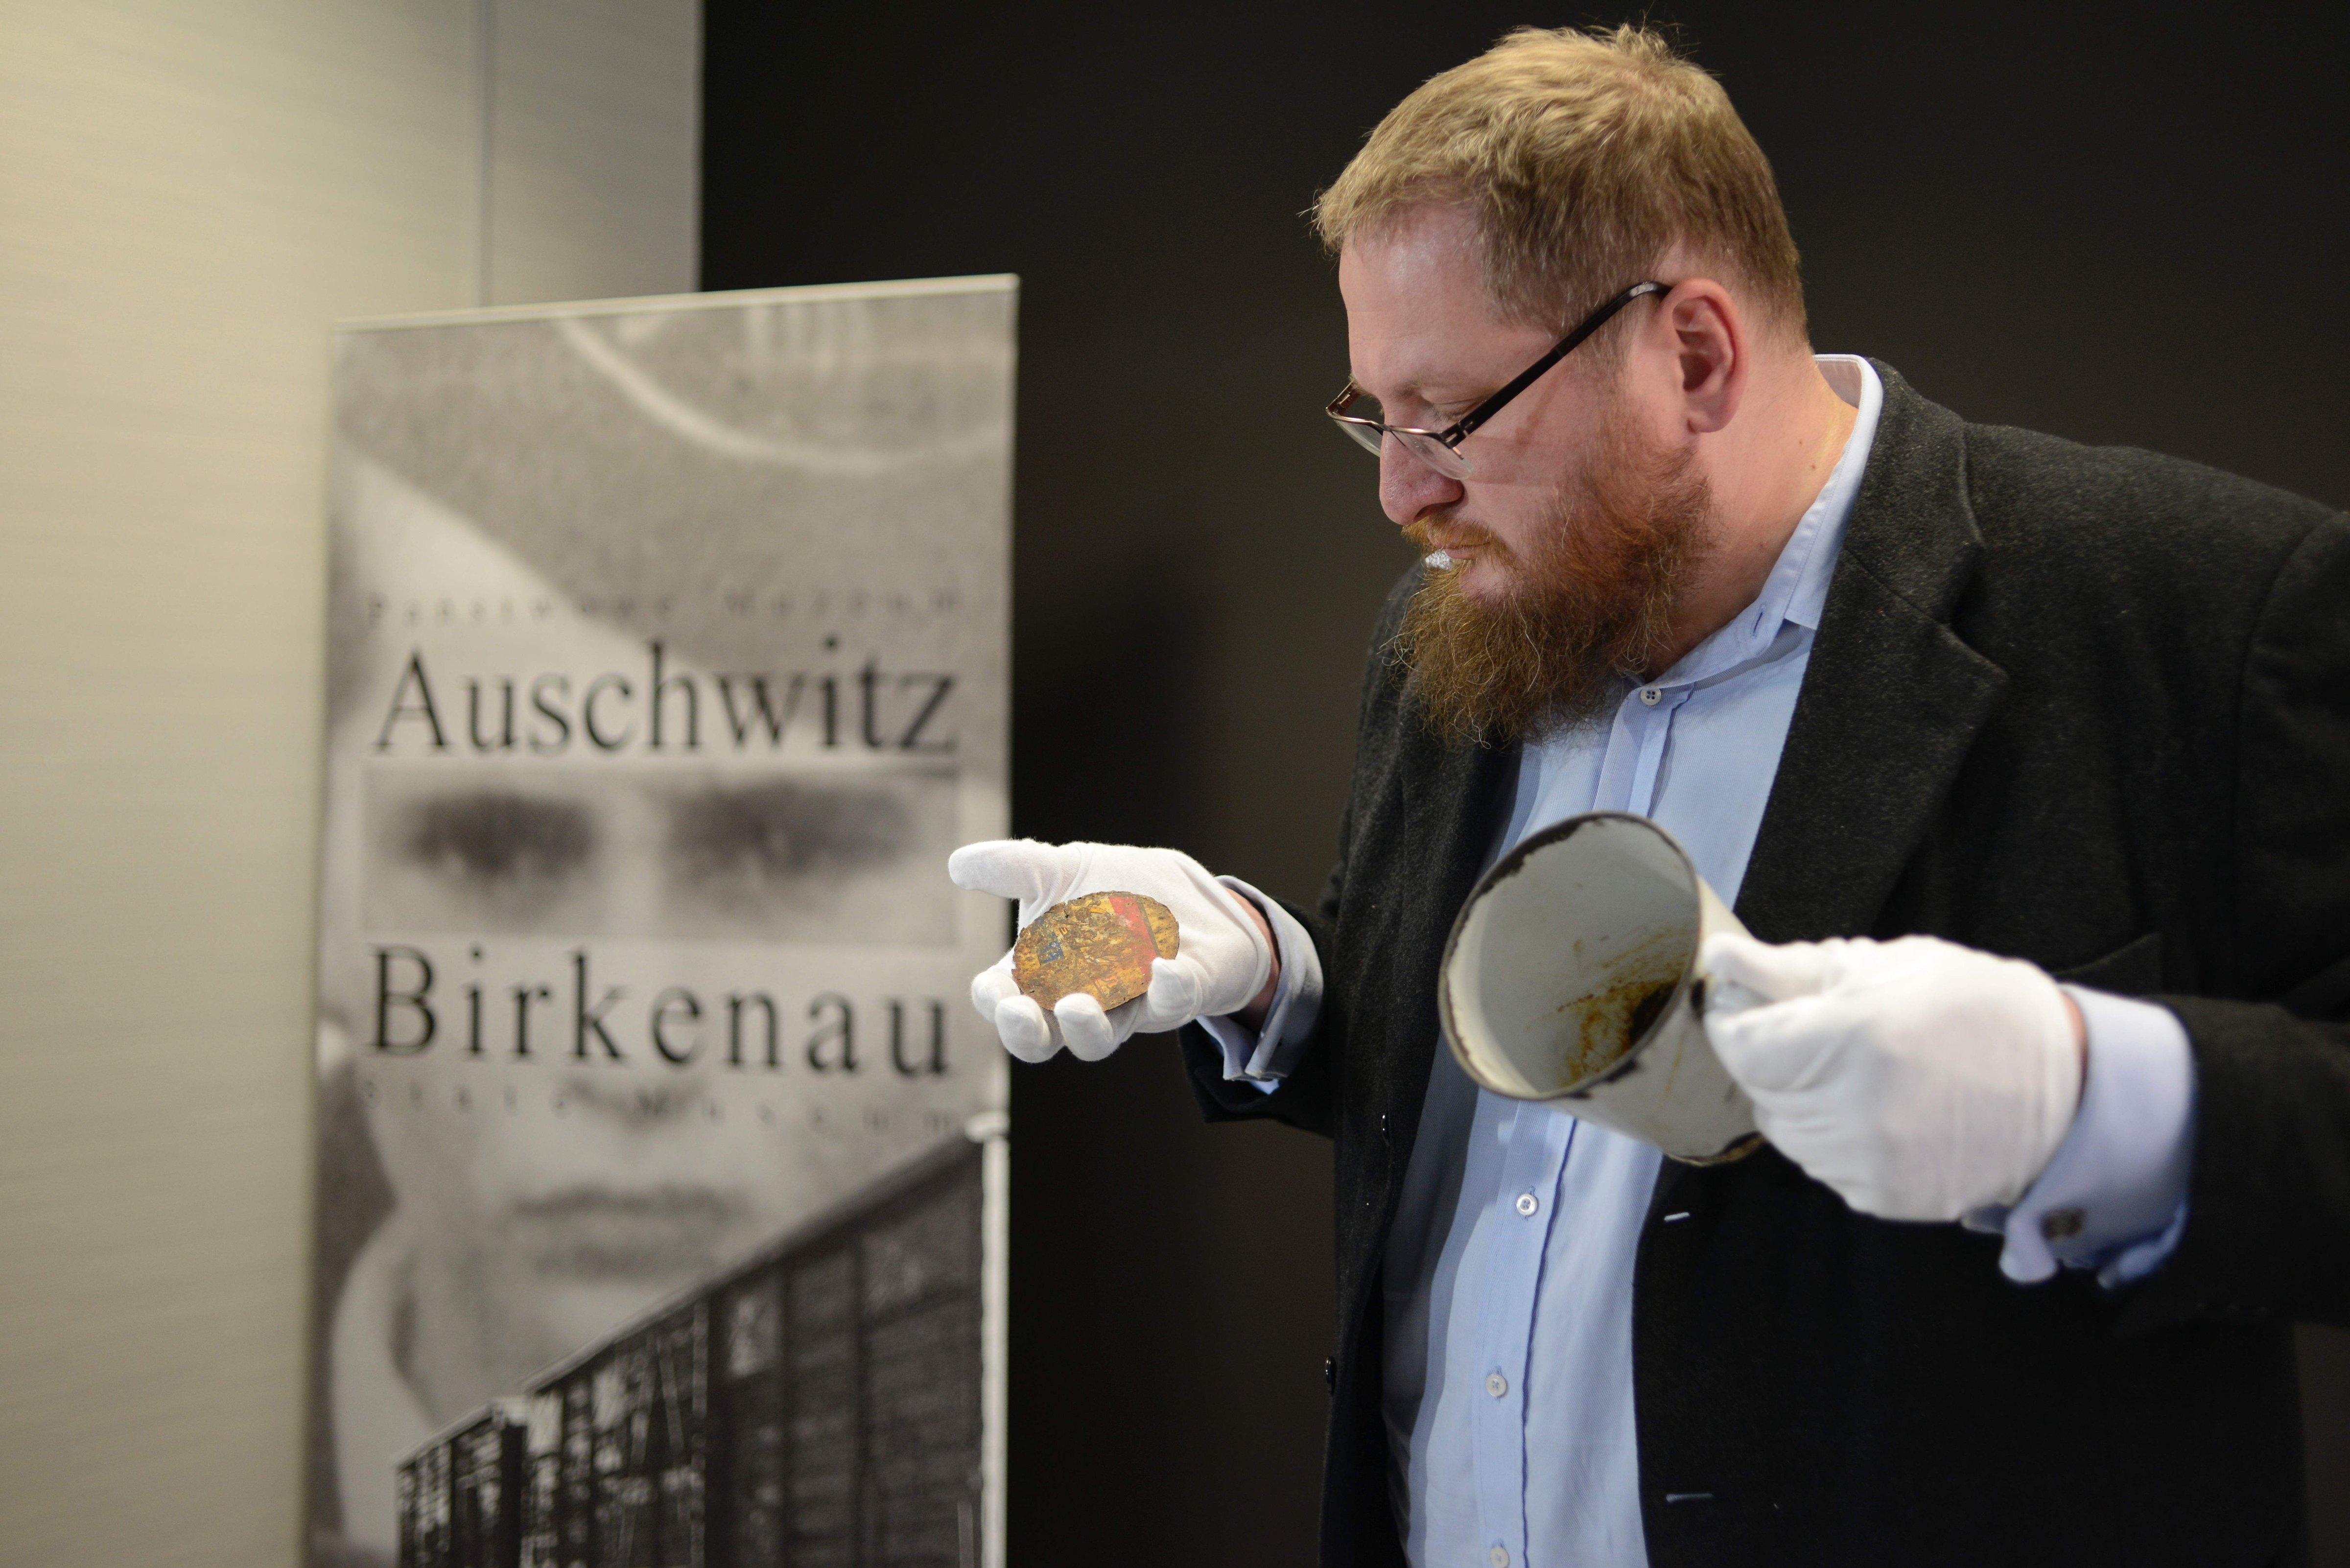 Piotr Cywinski, director of the Auschwitz-Birkenau museum, presents a metal mug with a double bottom in which a gold ring and necklace were found by employees of the museum in Oswiecim, Poland, May 19, 2016. (Bartosz Siedlik—AFP/Getty Images)